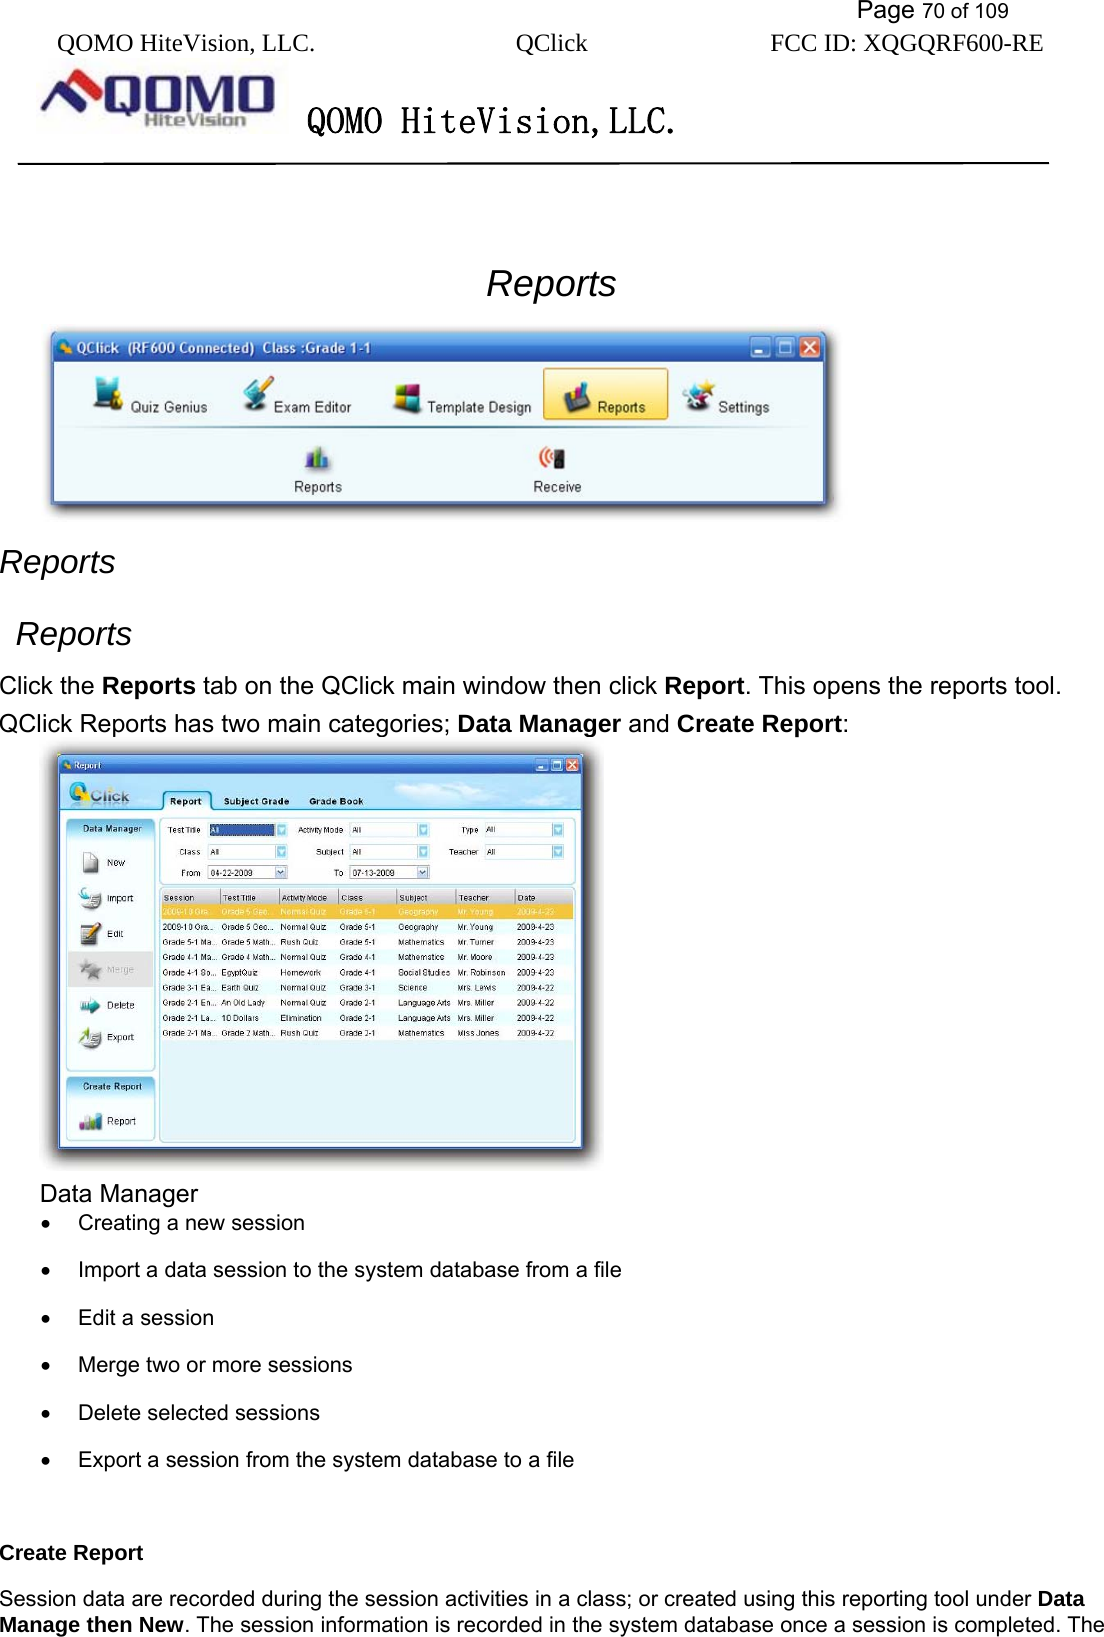           Page 70 of 109 QOMO HiteVision, LLC.  QClick        FCC ID: XQGQRF600-RE     QOMO HiteVision,LLC.   jjj3 Reports  Reports  Reports Click the Reports tab on the QClick main window then click Report. This opens the reports tool. QClick Reports has two main categories; Data Manager and Create Report:   Data Manager •  Creating a new session •  Import a data session to the system database from a file •  Edit a session •  Merge two or more sessions •  Delete selected sessions •  Export a session from the system database to a file  Create Report Session data are recorded during the session activities in a class; or created using this reporting tool under Data Manage then New. The session information is recorded in the system database once a session is completed. The 